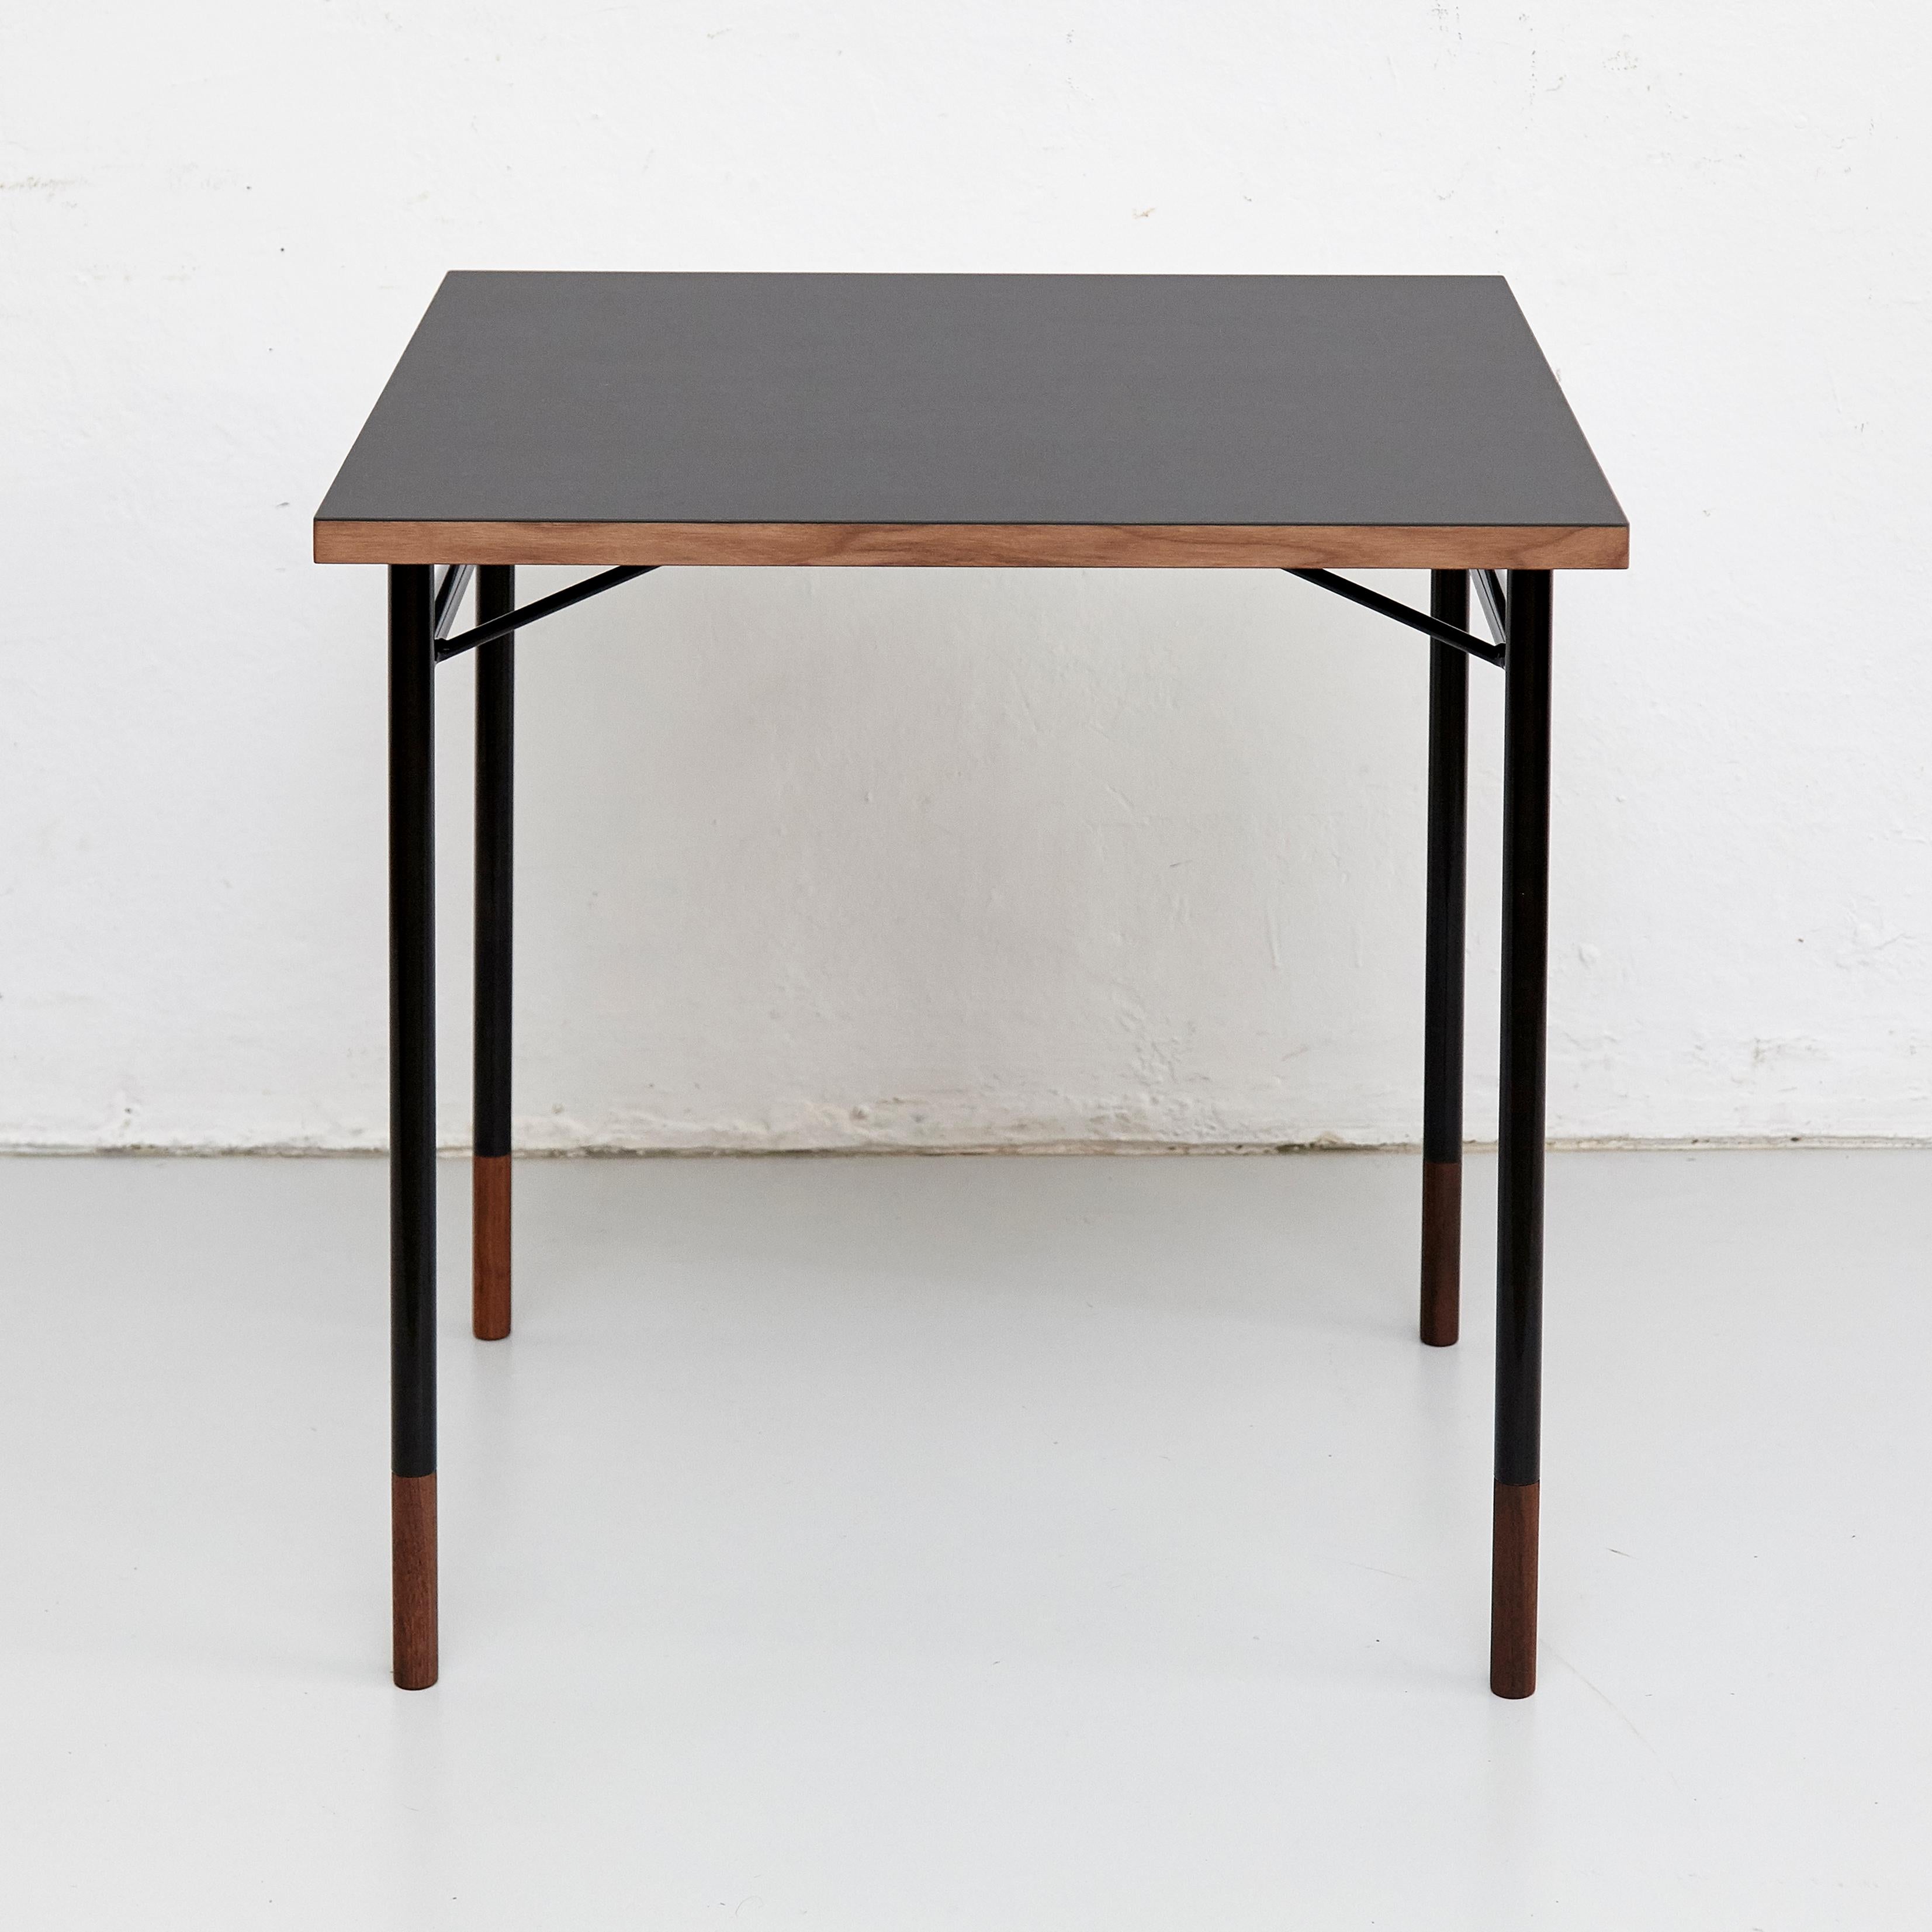 Desk designed by Finn Jhul
Manufactured by one collection Finn Juhl, (Denmark)

When Finn Juhl established his first studio at the exclusive address of 33 Nyhavn in central Copenhagen in 1945, he designed a very simple desk with burnished steel